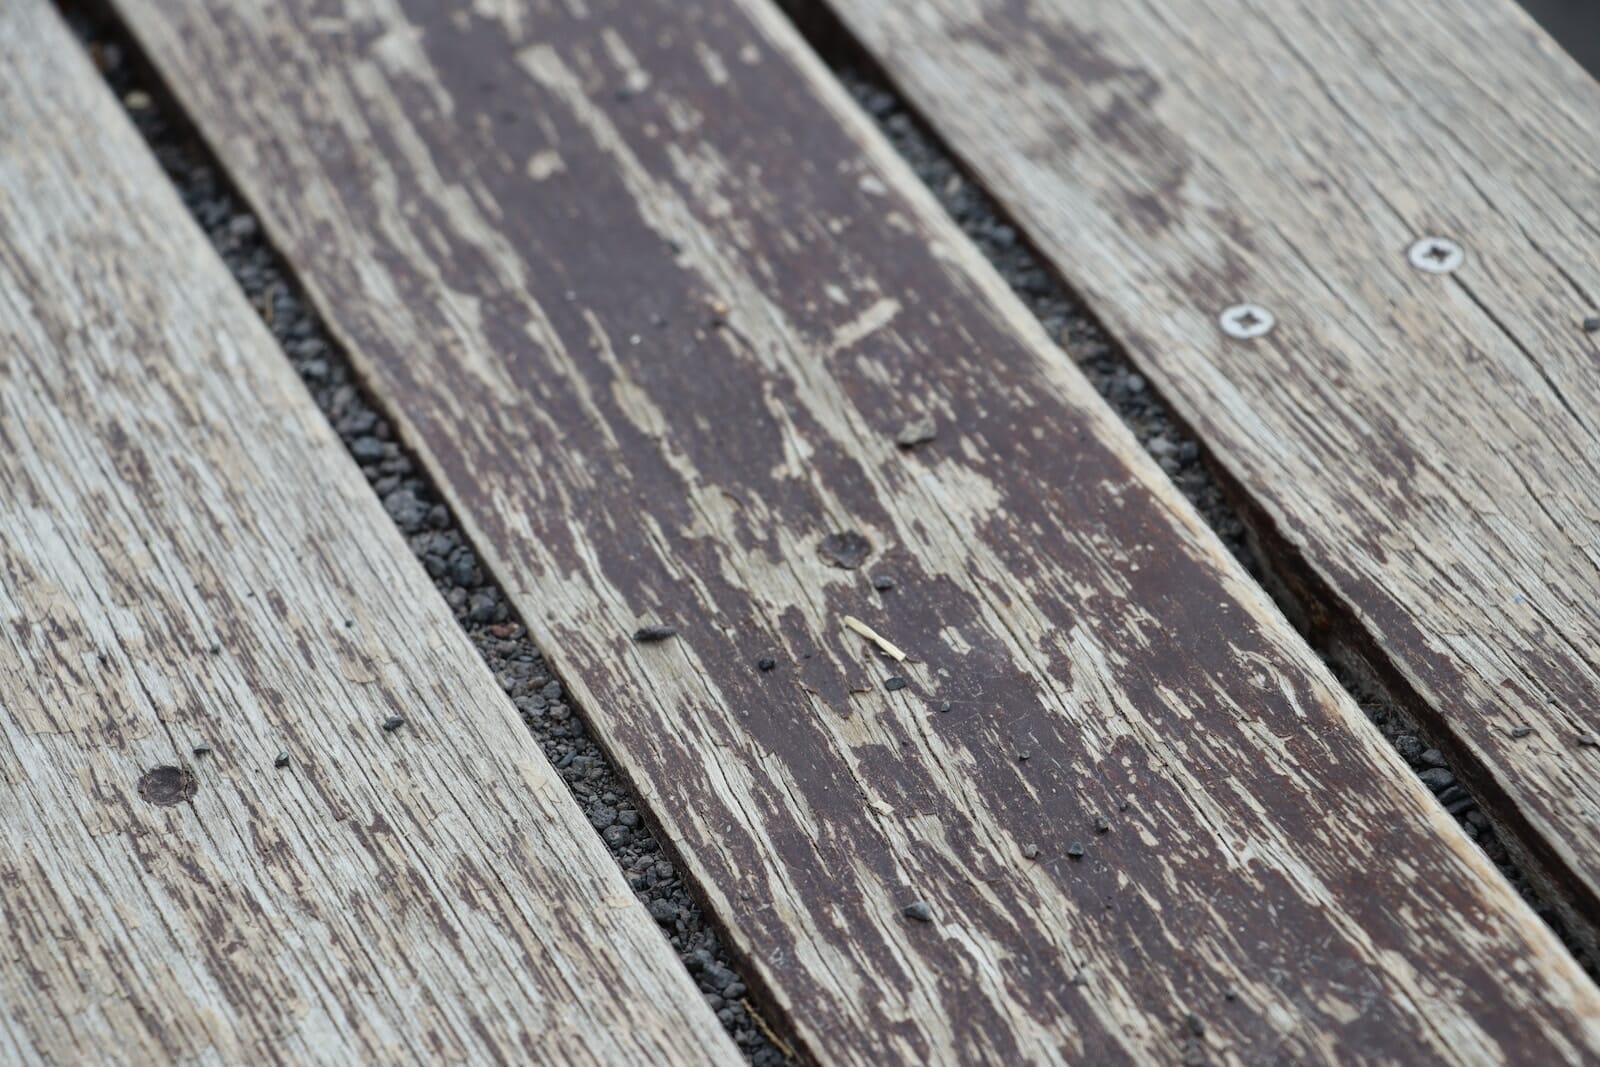 a close up of a wooden bench with nails on it